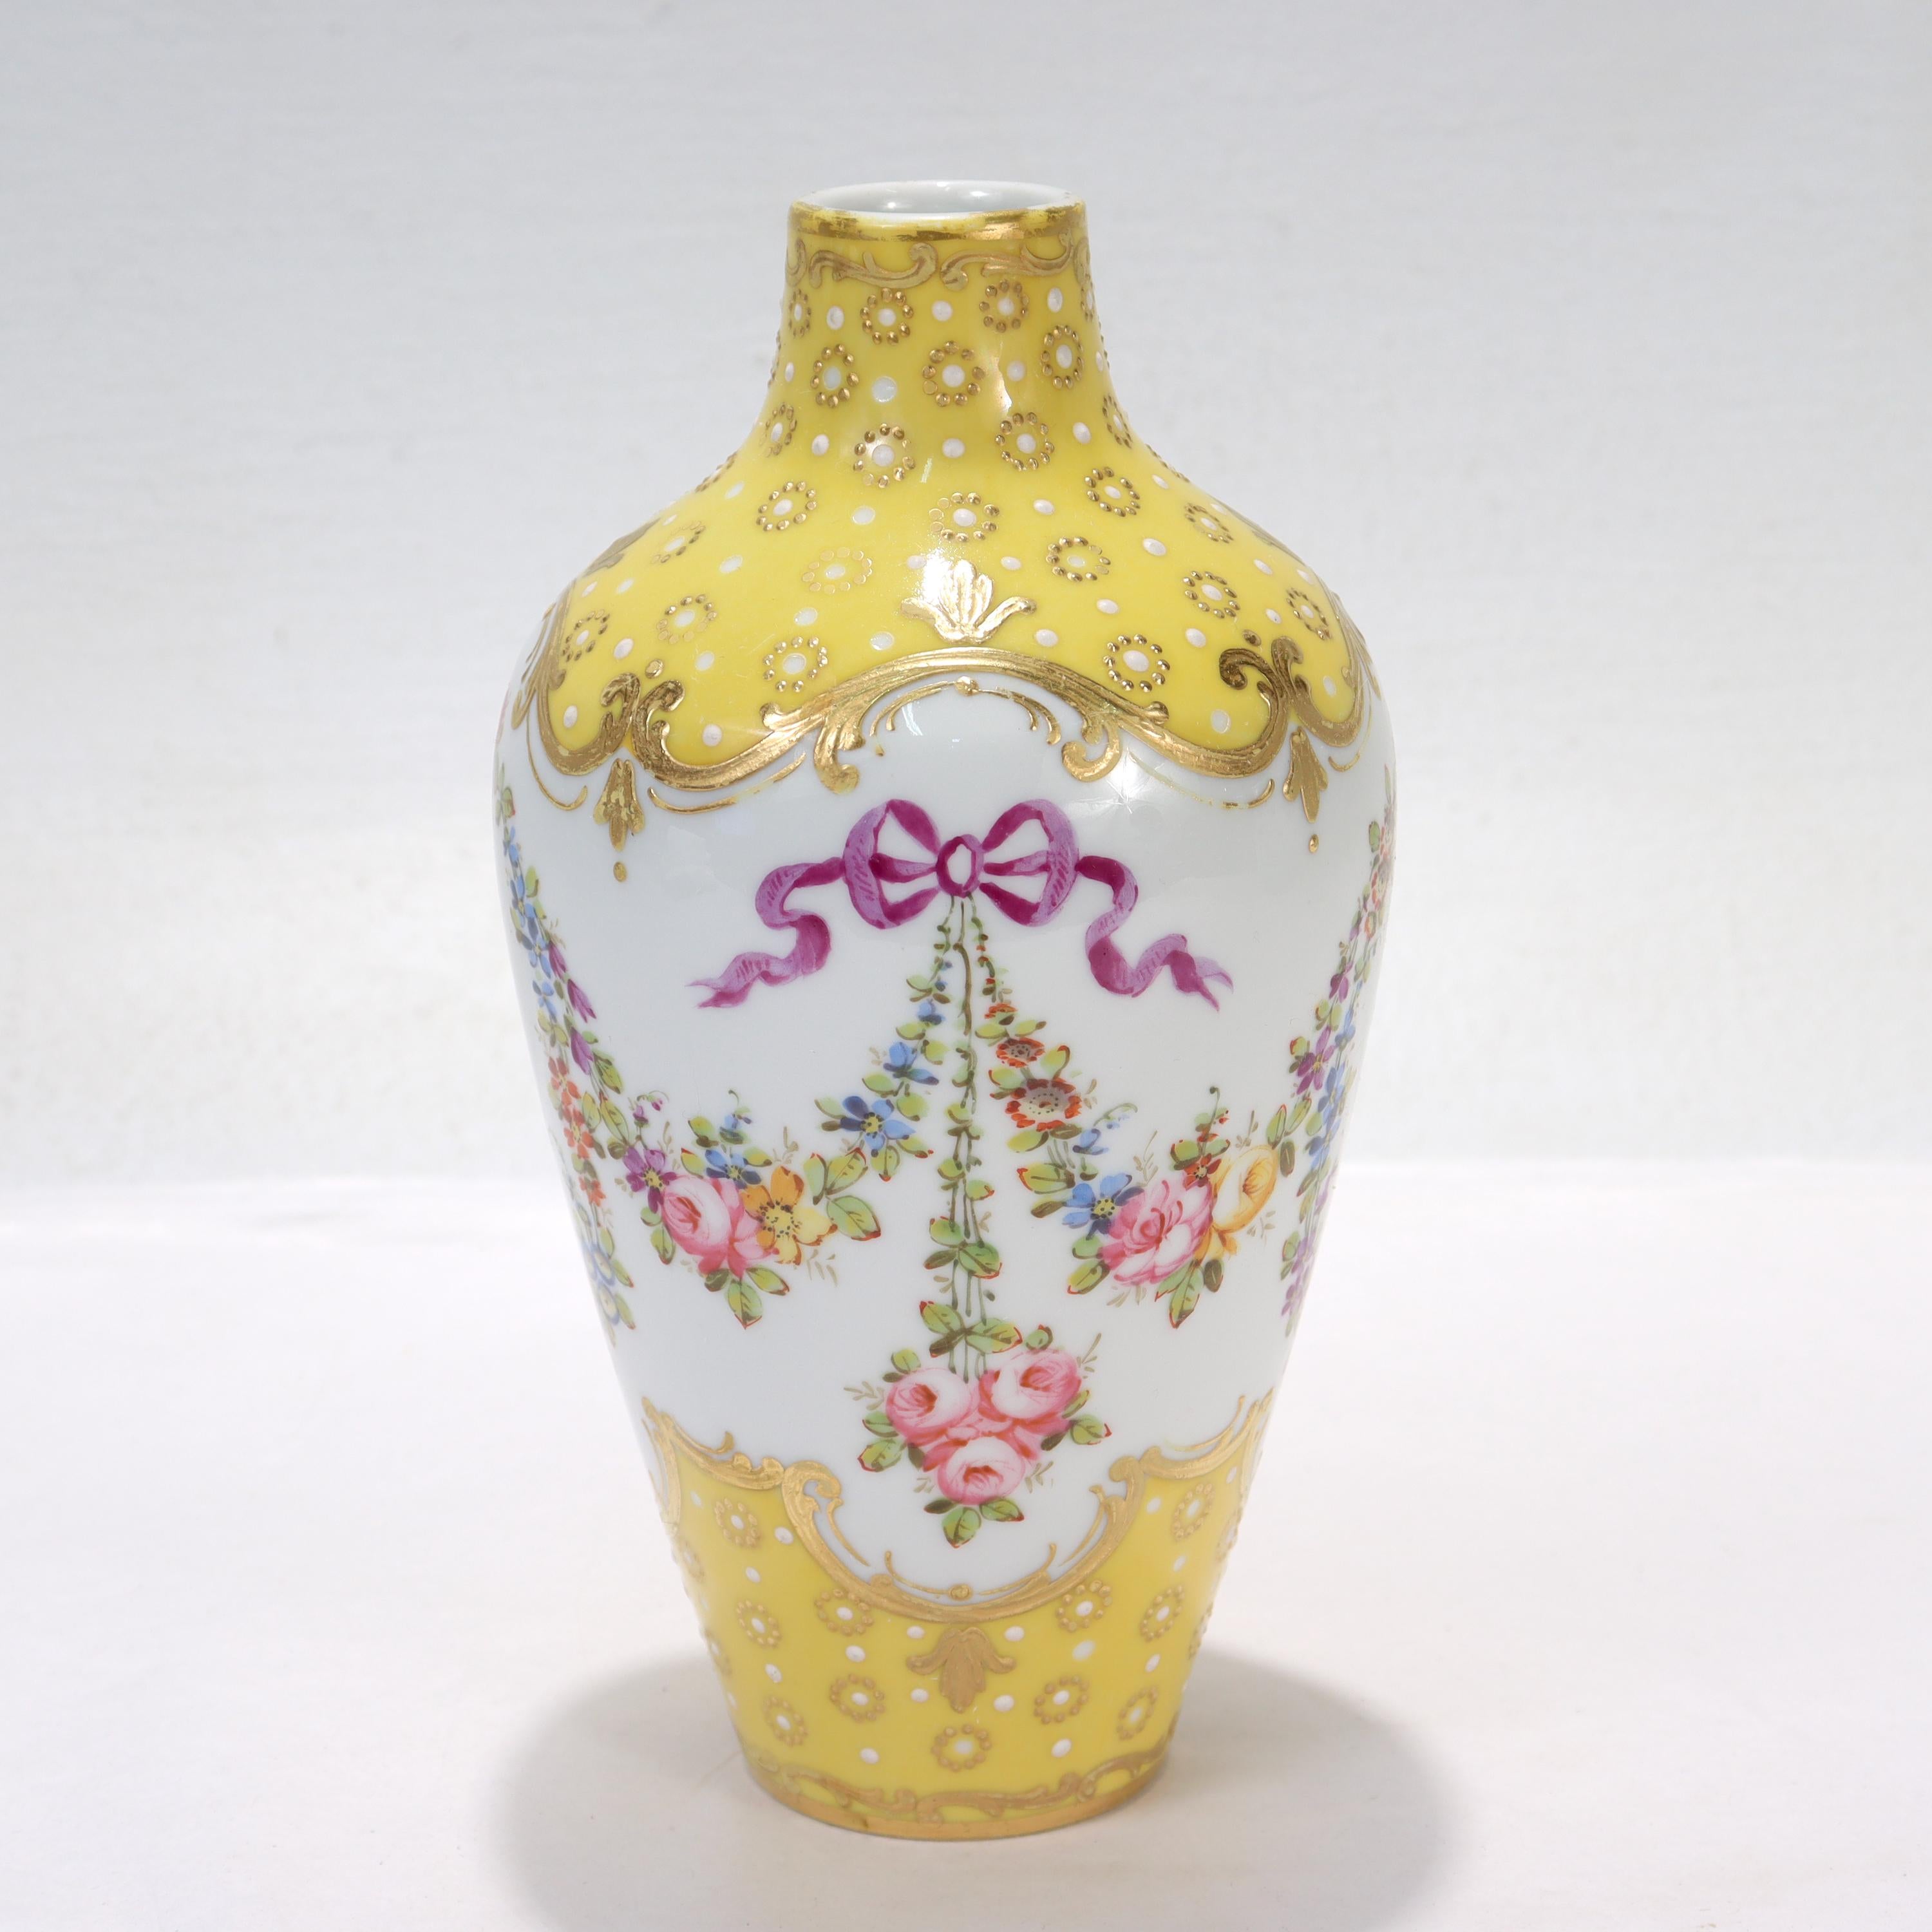 A fine antique French Sevres type porcelain vase.

With gilt highlights on a yellow ground, hand painted floral garlands, and white enamel jeweling throughout. 

Simply a wonderful antique French porcelain vase!

Date:
Late 19th or Early 20th